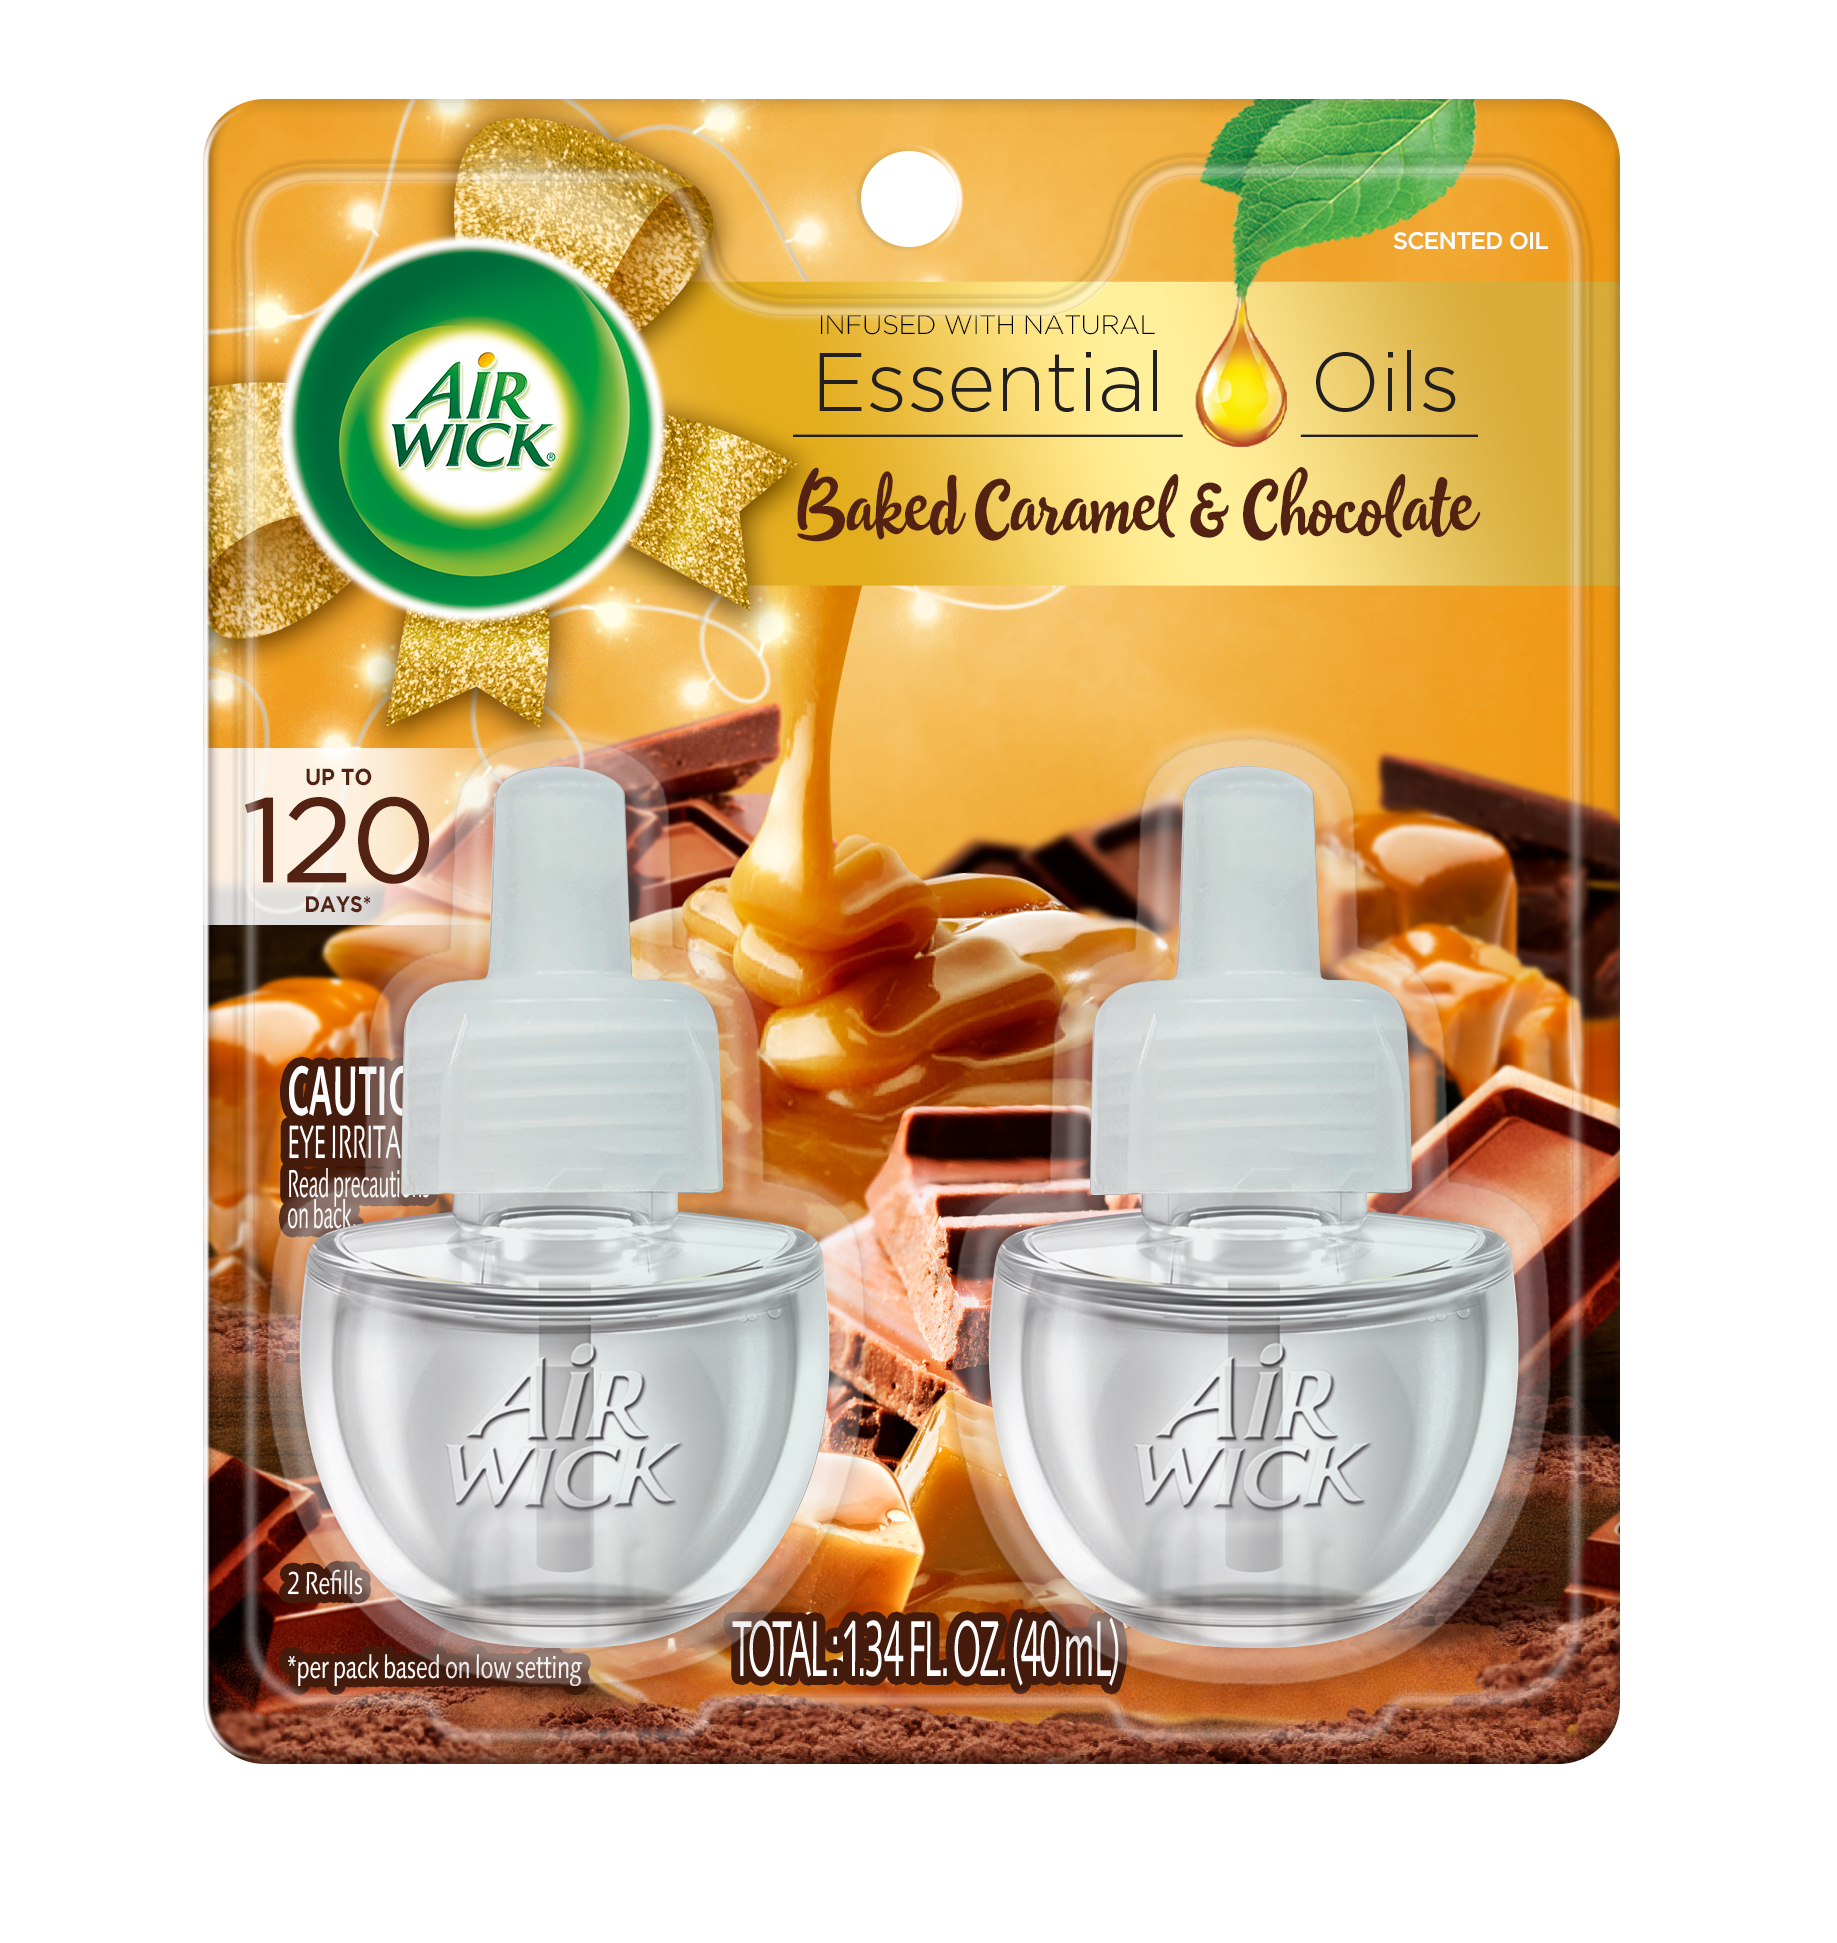 AIR WICK® Scented Oil - Baked Caramel & Chocolate